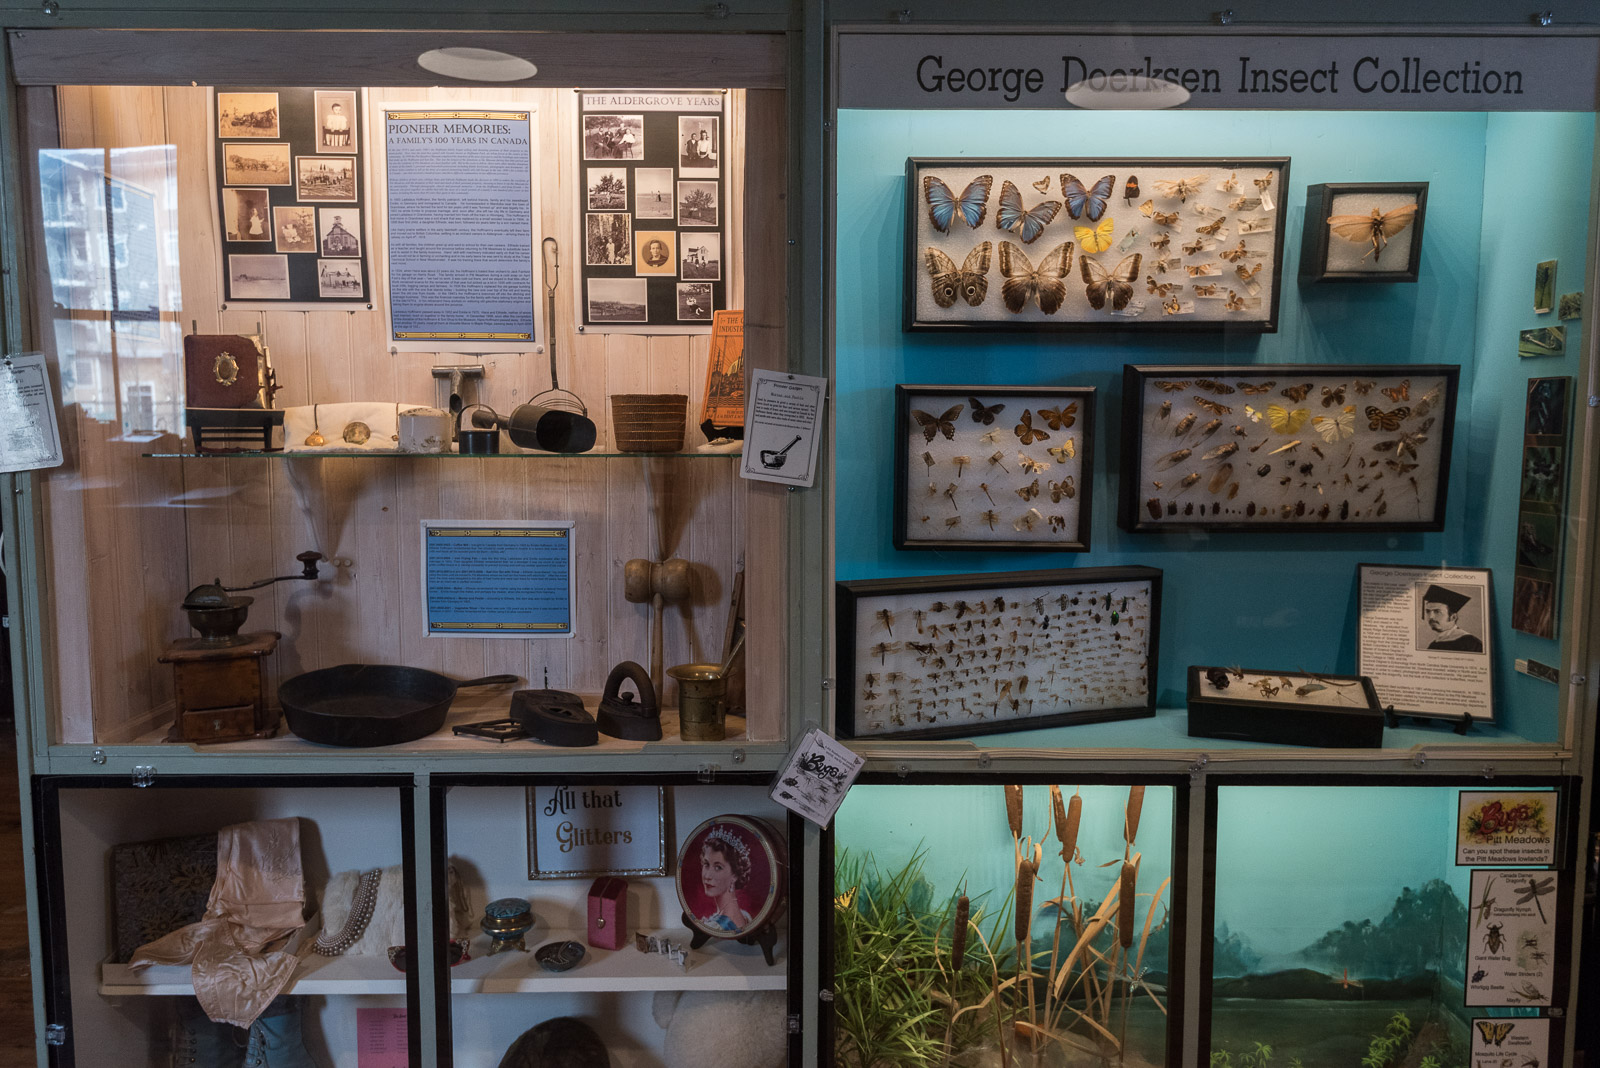 Permanent display cabinets